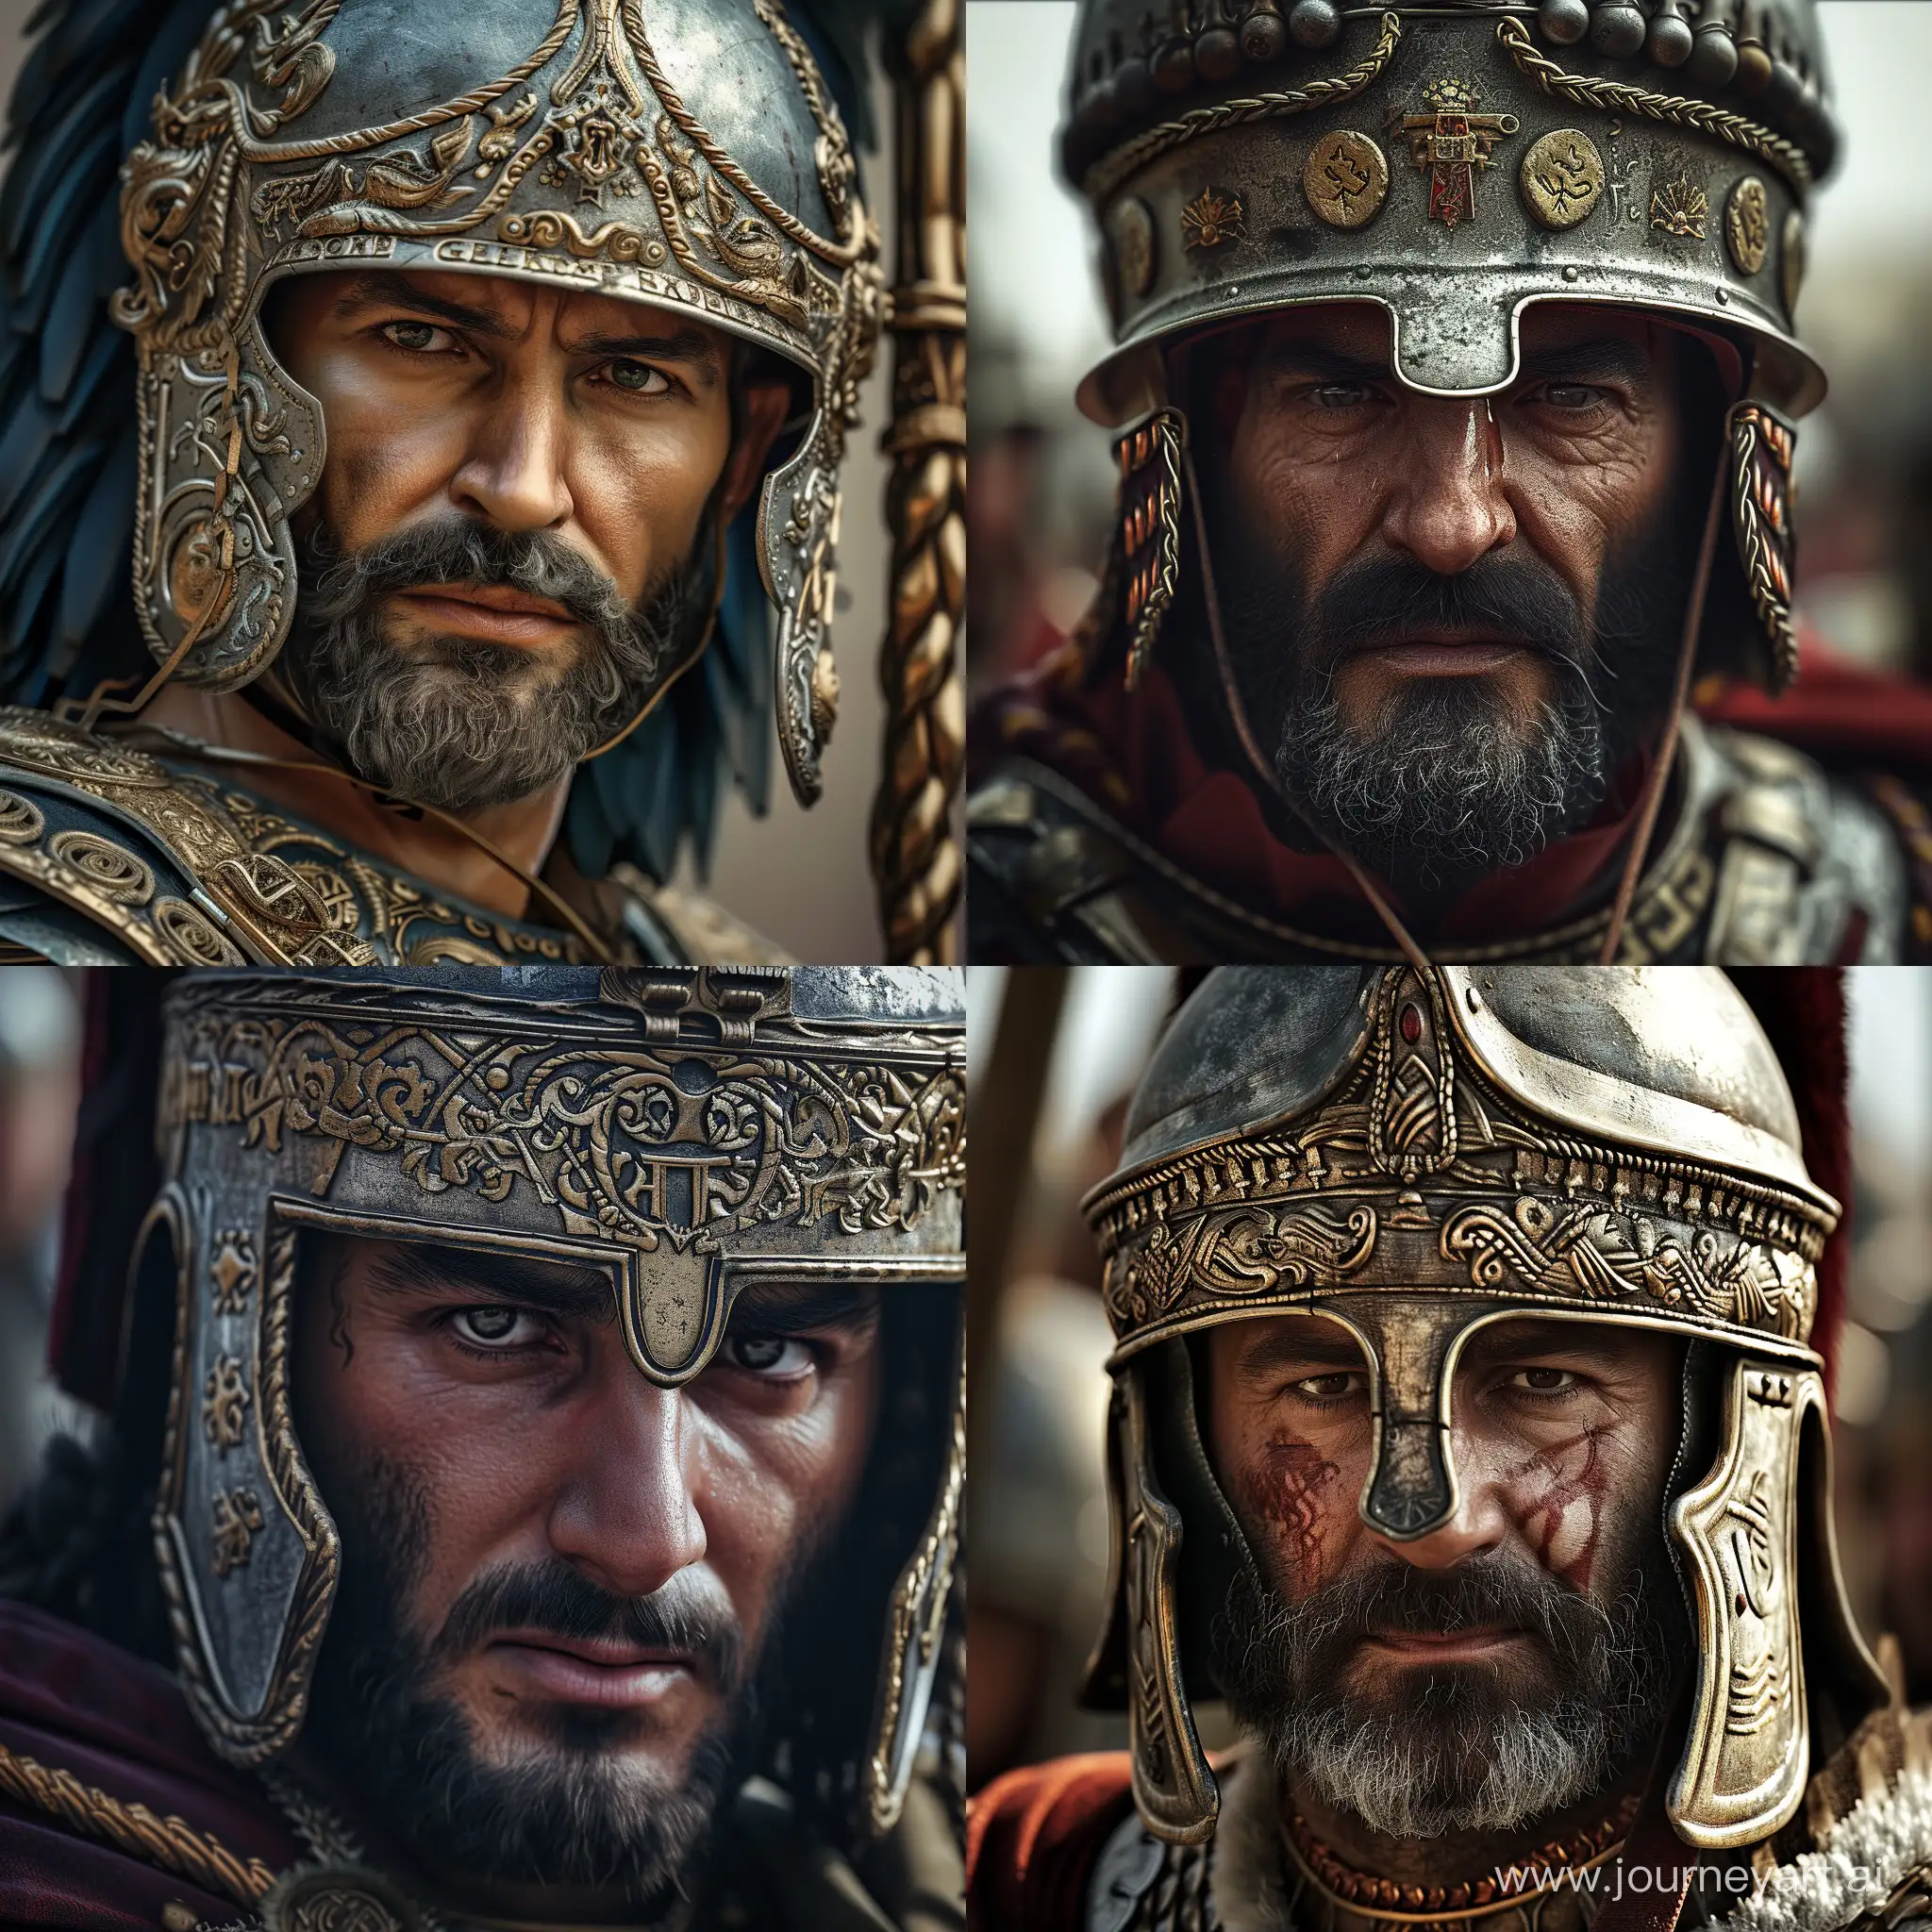 Byzantine General Belisarius at Constantinople. He is wearing his General attire and helmet. He seems proud and brave. Close up. Impressive detailed Realistic image.